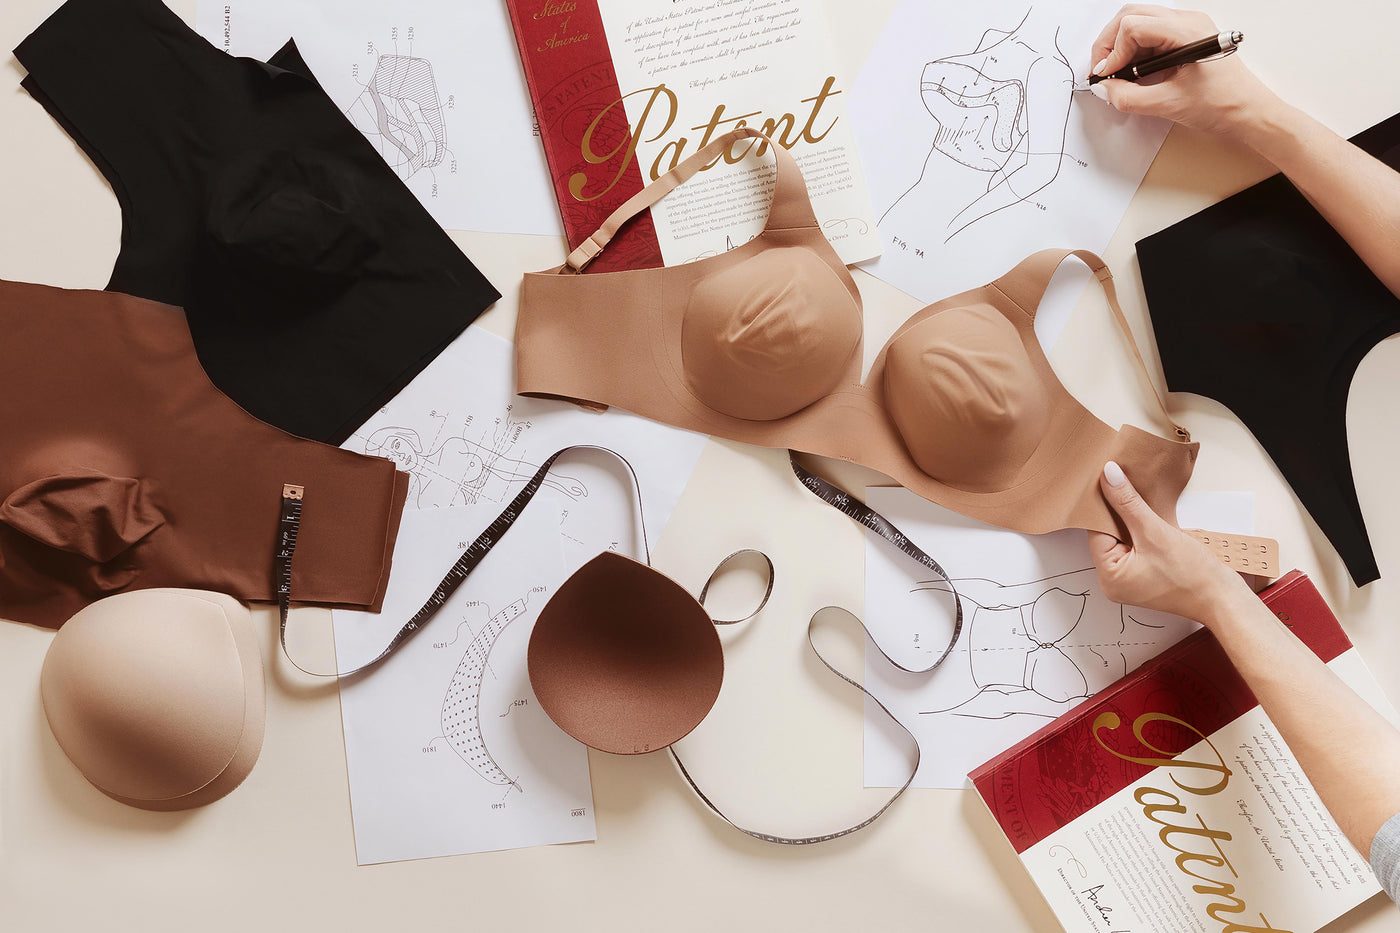 KEEKS olivia Bras, a disruptive startup, is shaking up the 80 year old foam  padded bra industry - IssueWire